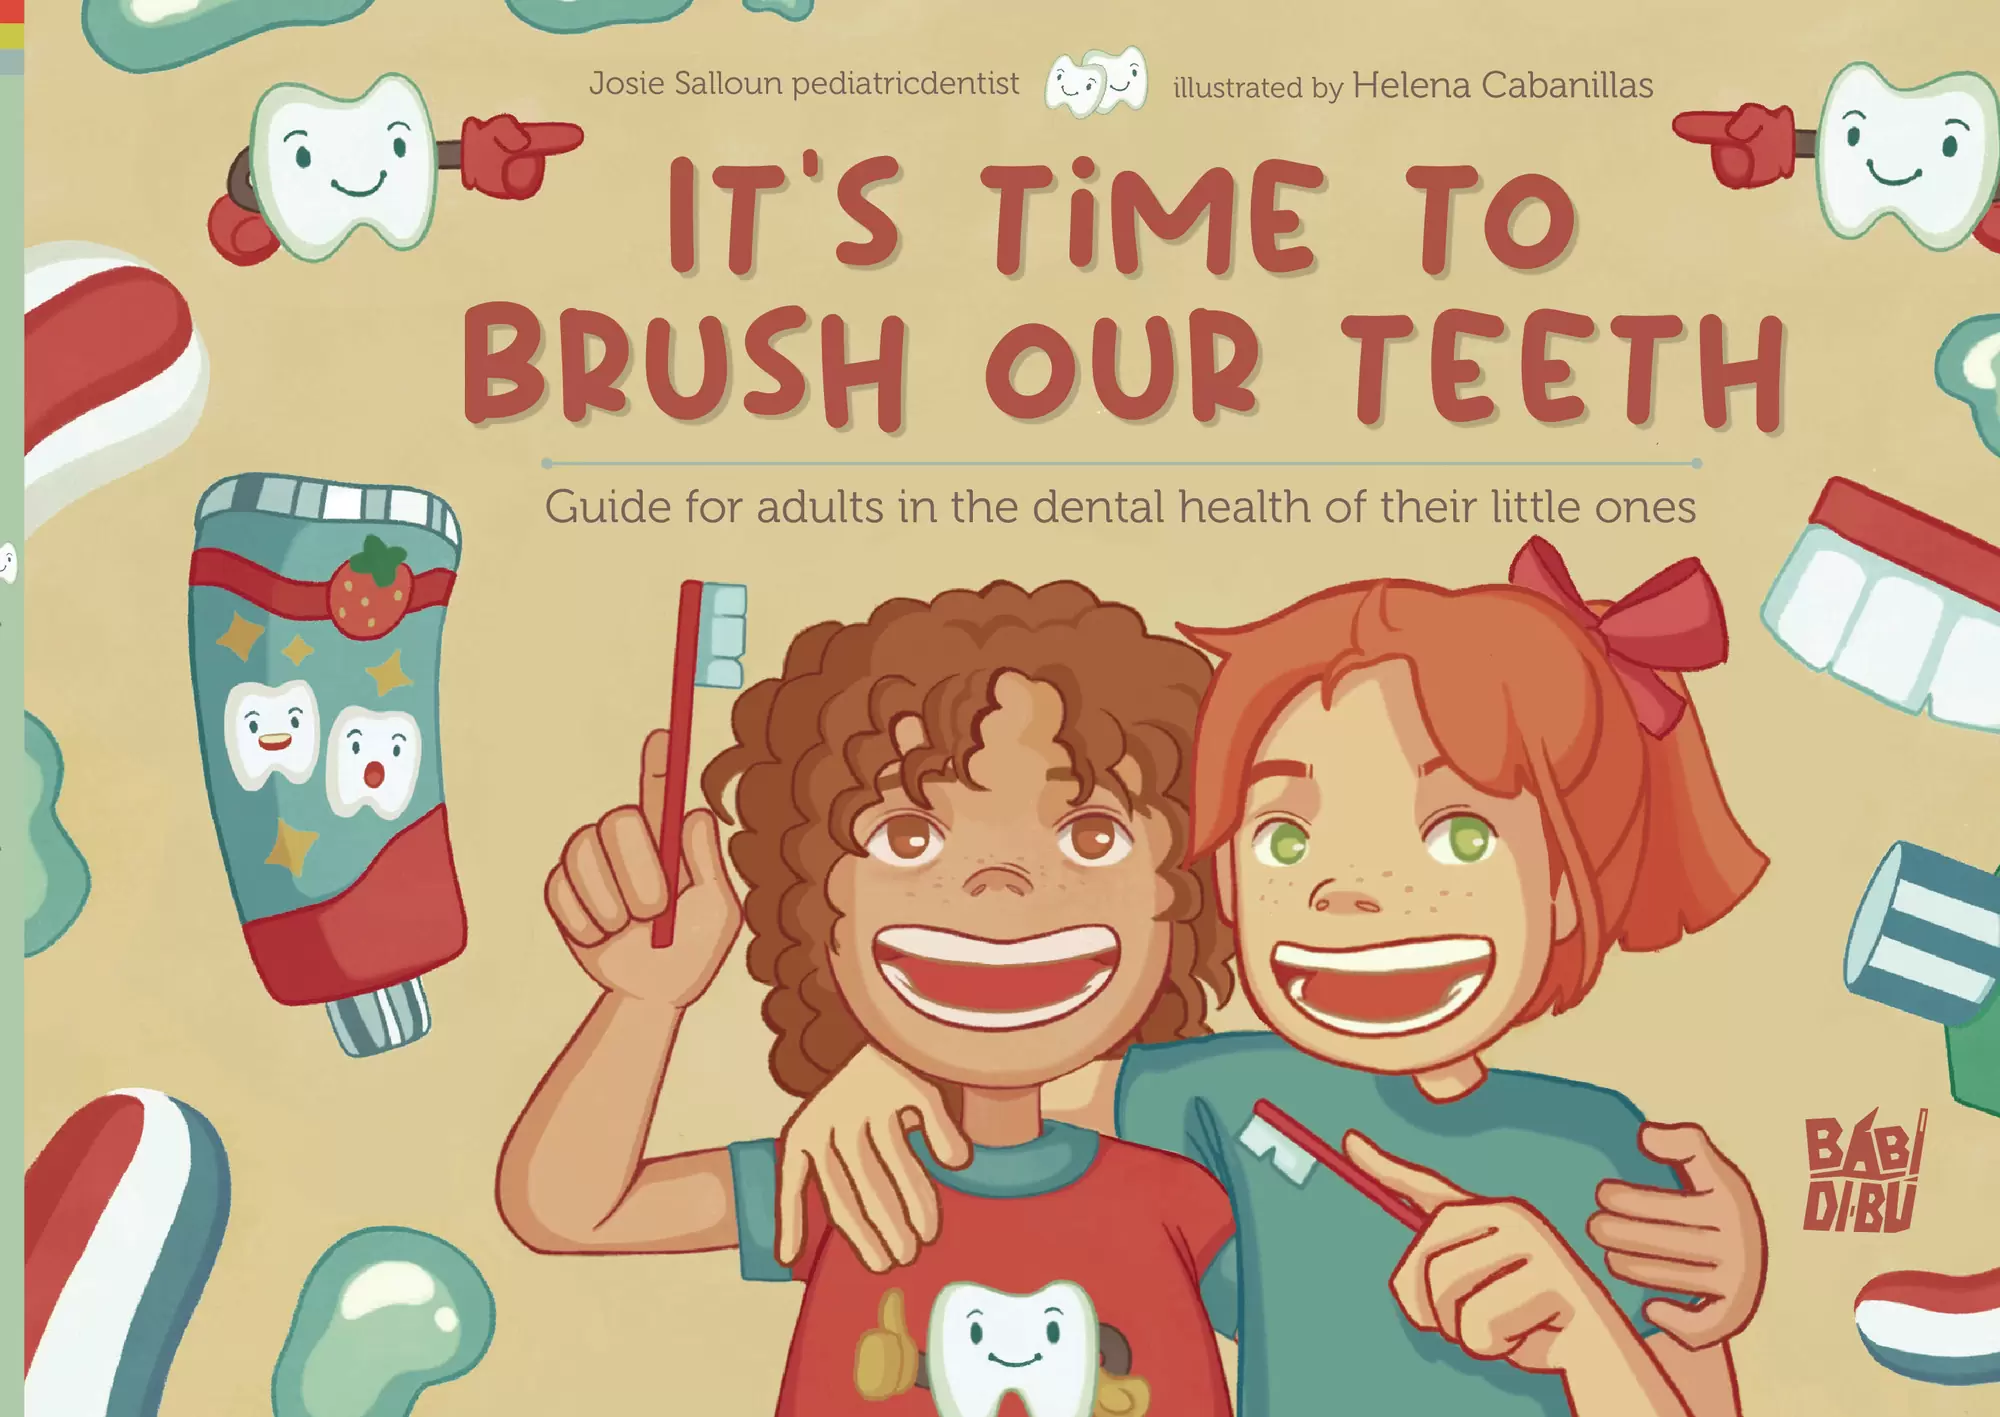 Its Time To Brush Our Teethcubiertacdb.pdf 2000 It’s Time To Brush Our Teeth